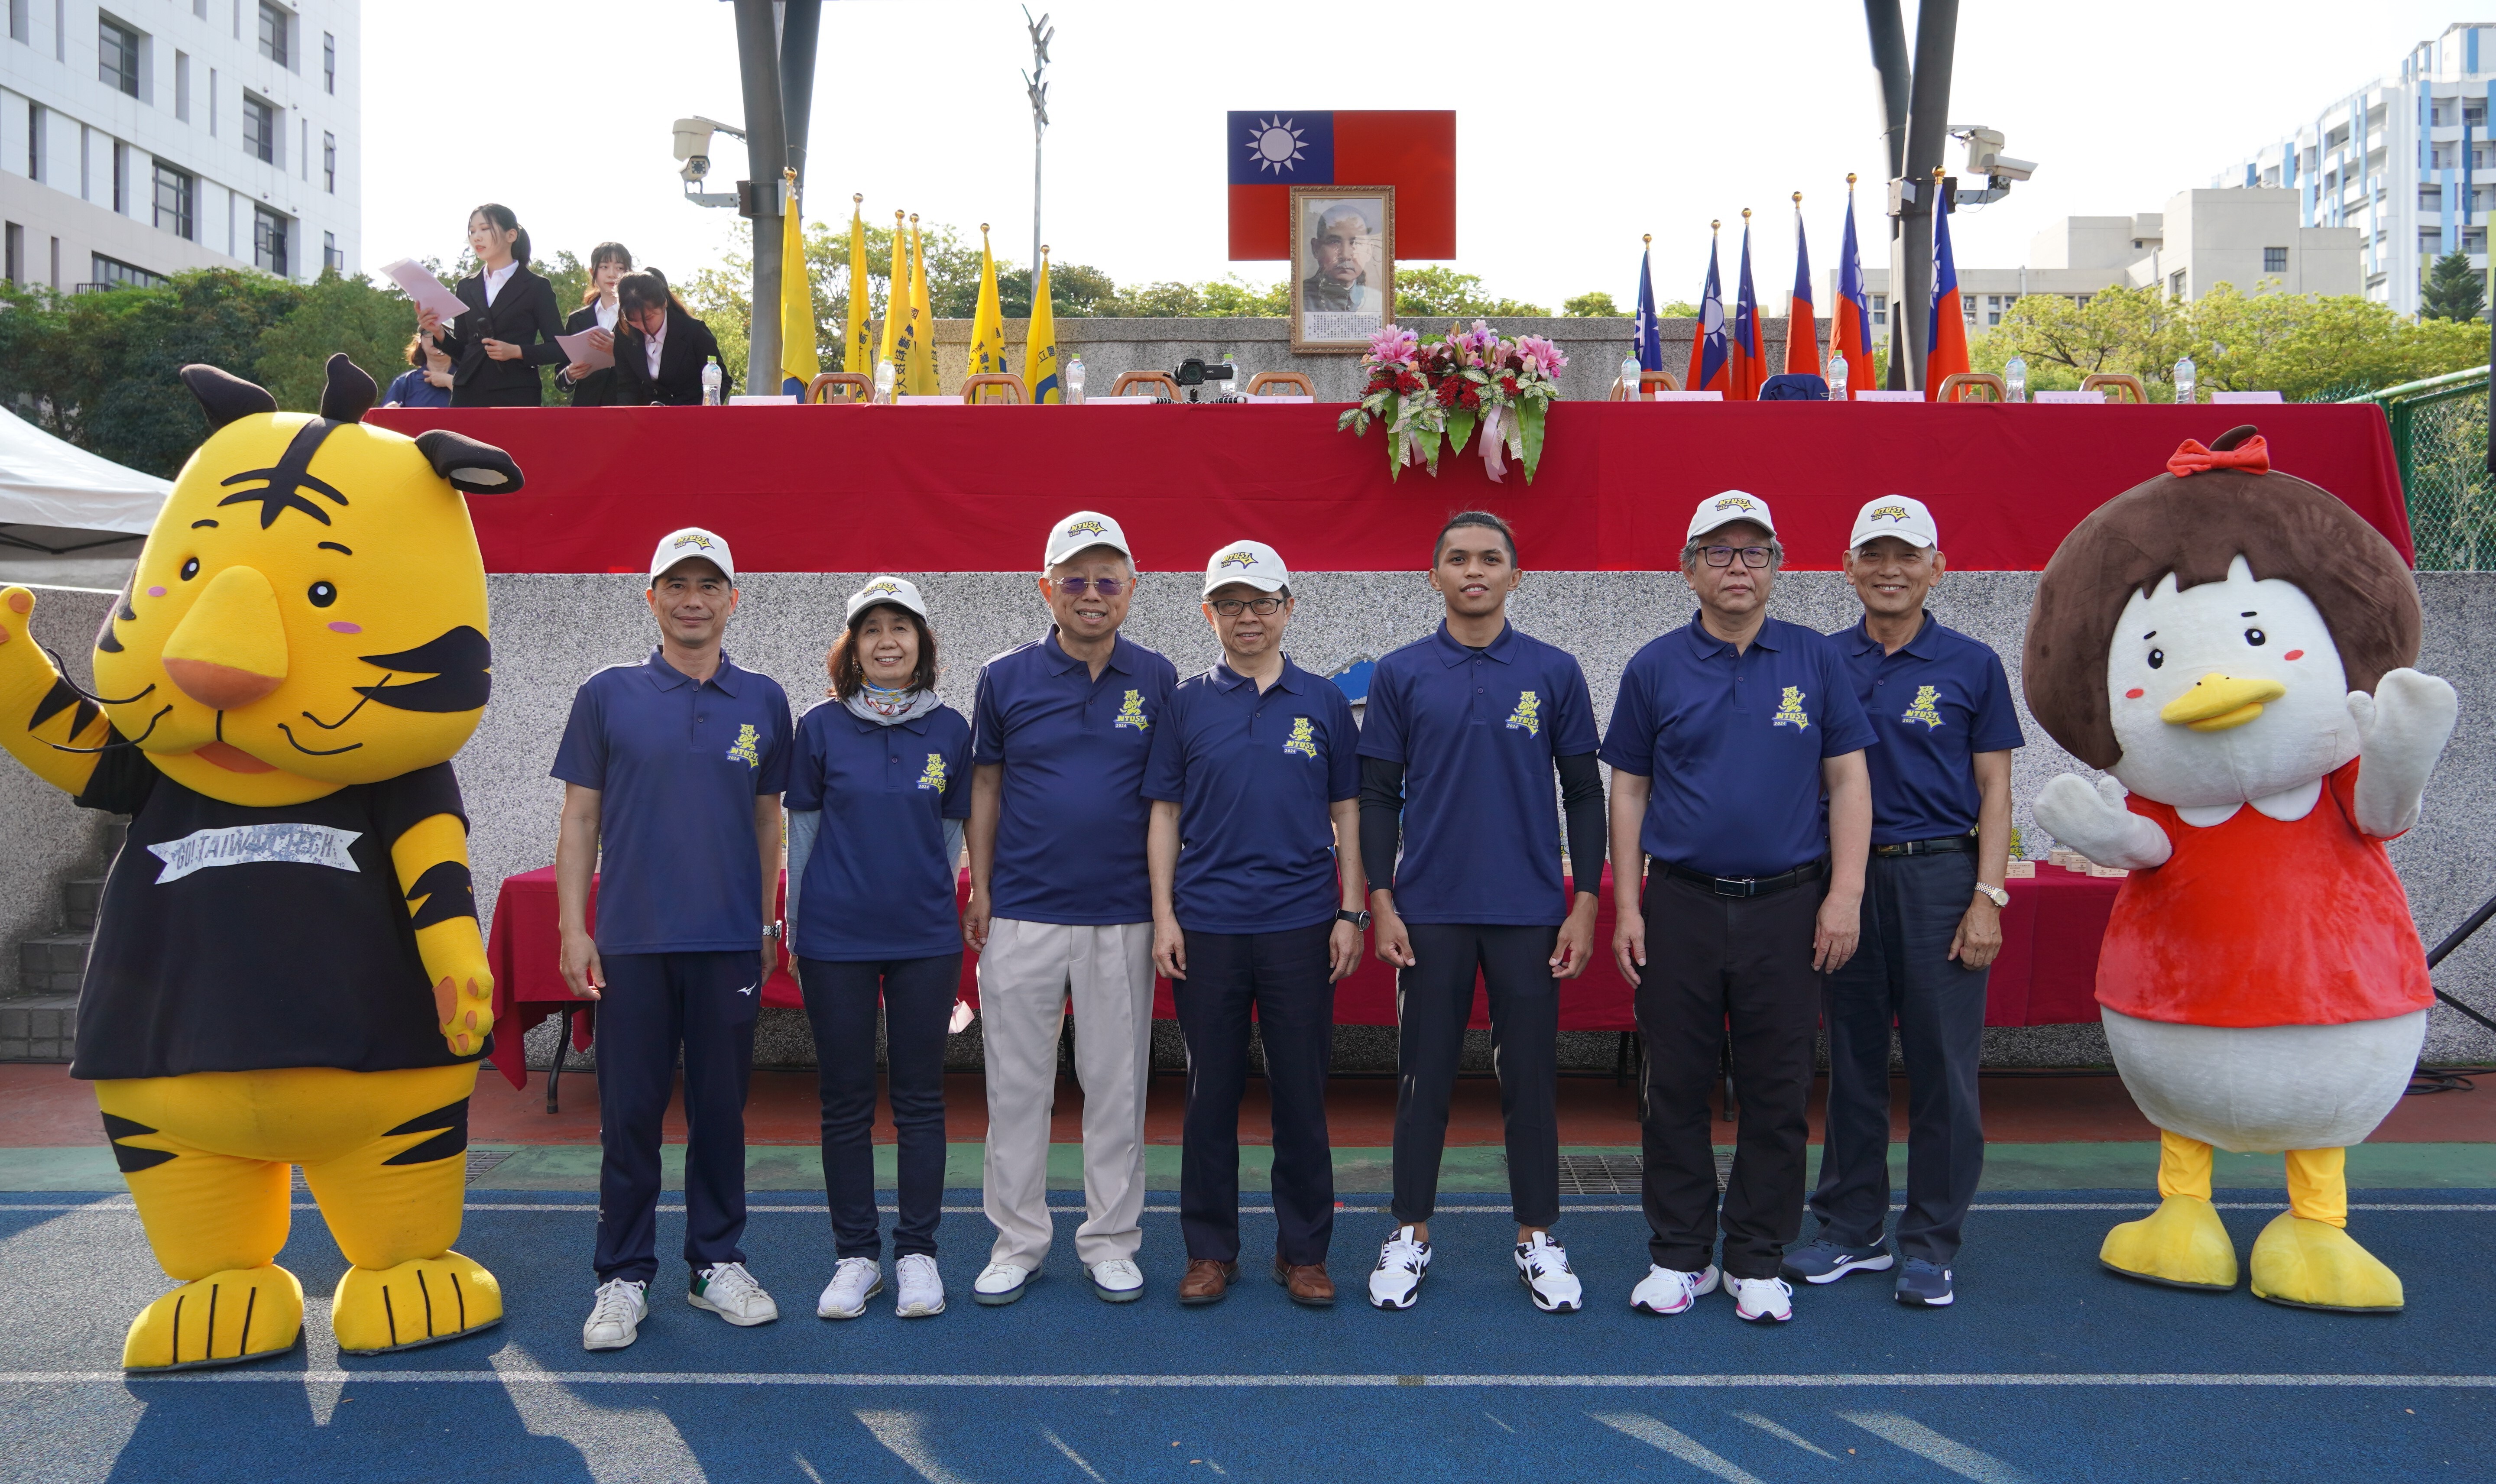 Taiwan Tech’s President Jia-Yush Yen (fourth from the right) along with senior executives, Taiwan Tech's mascot Tiger Duck, and guest Zhu-En Lai (third from the right) take a group photo.